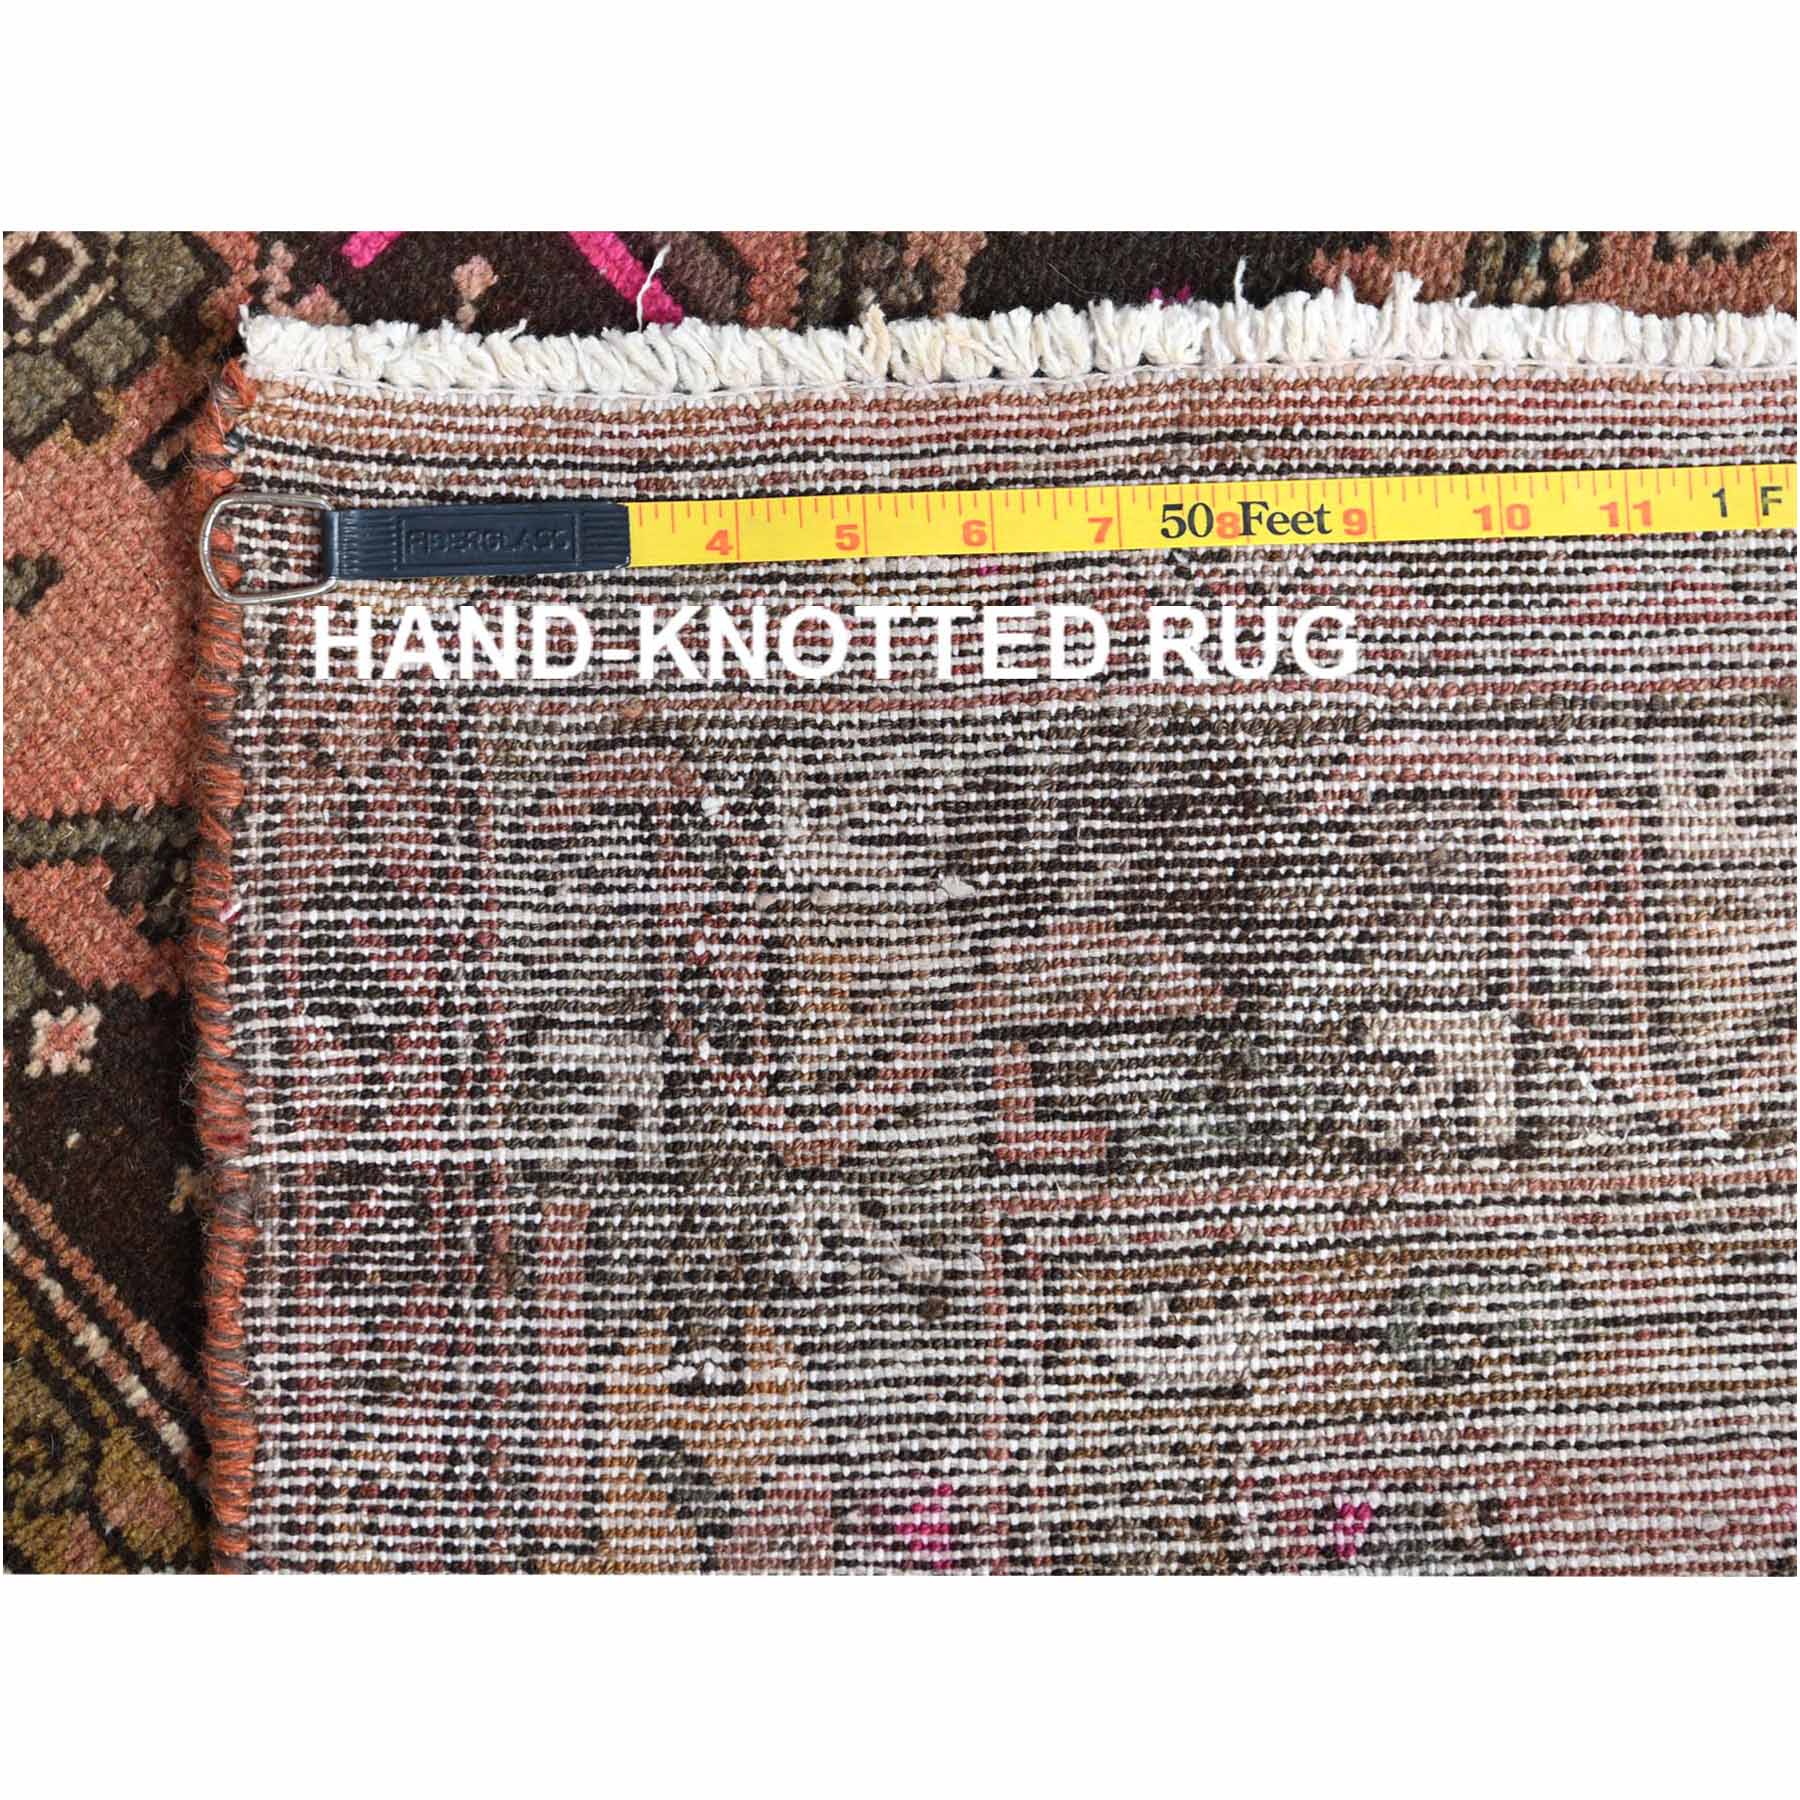 Overdyed-Vintage-Hand-Knotted-Rug-309315